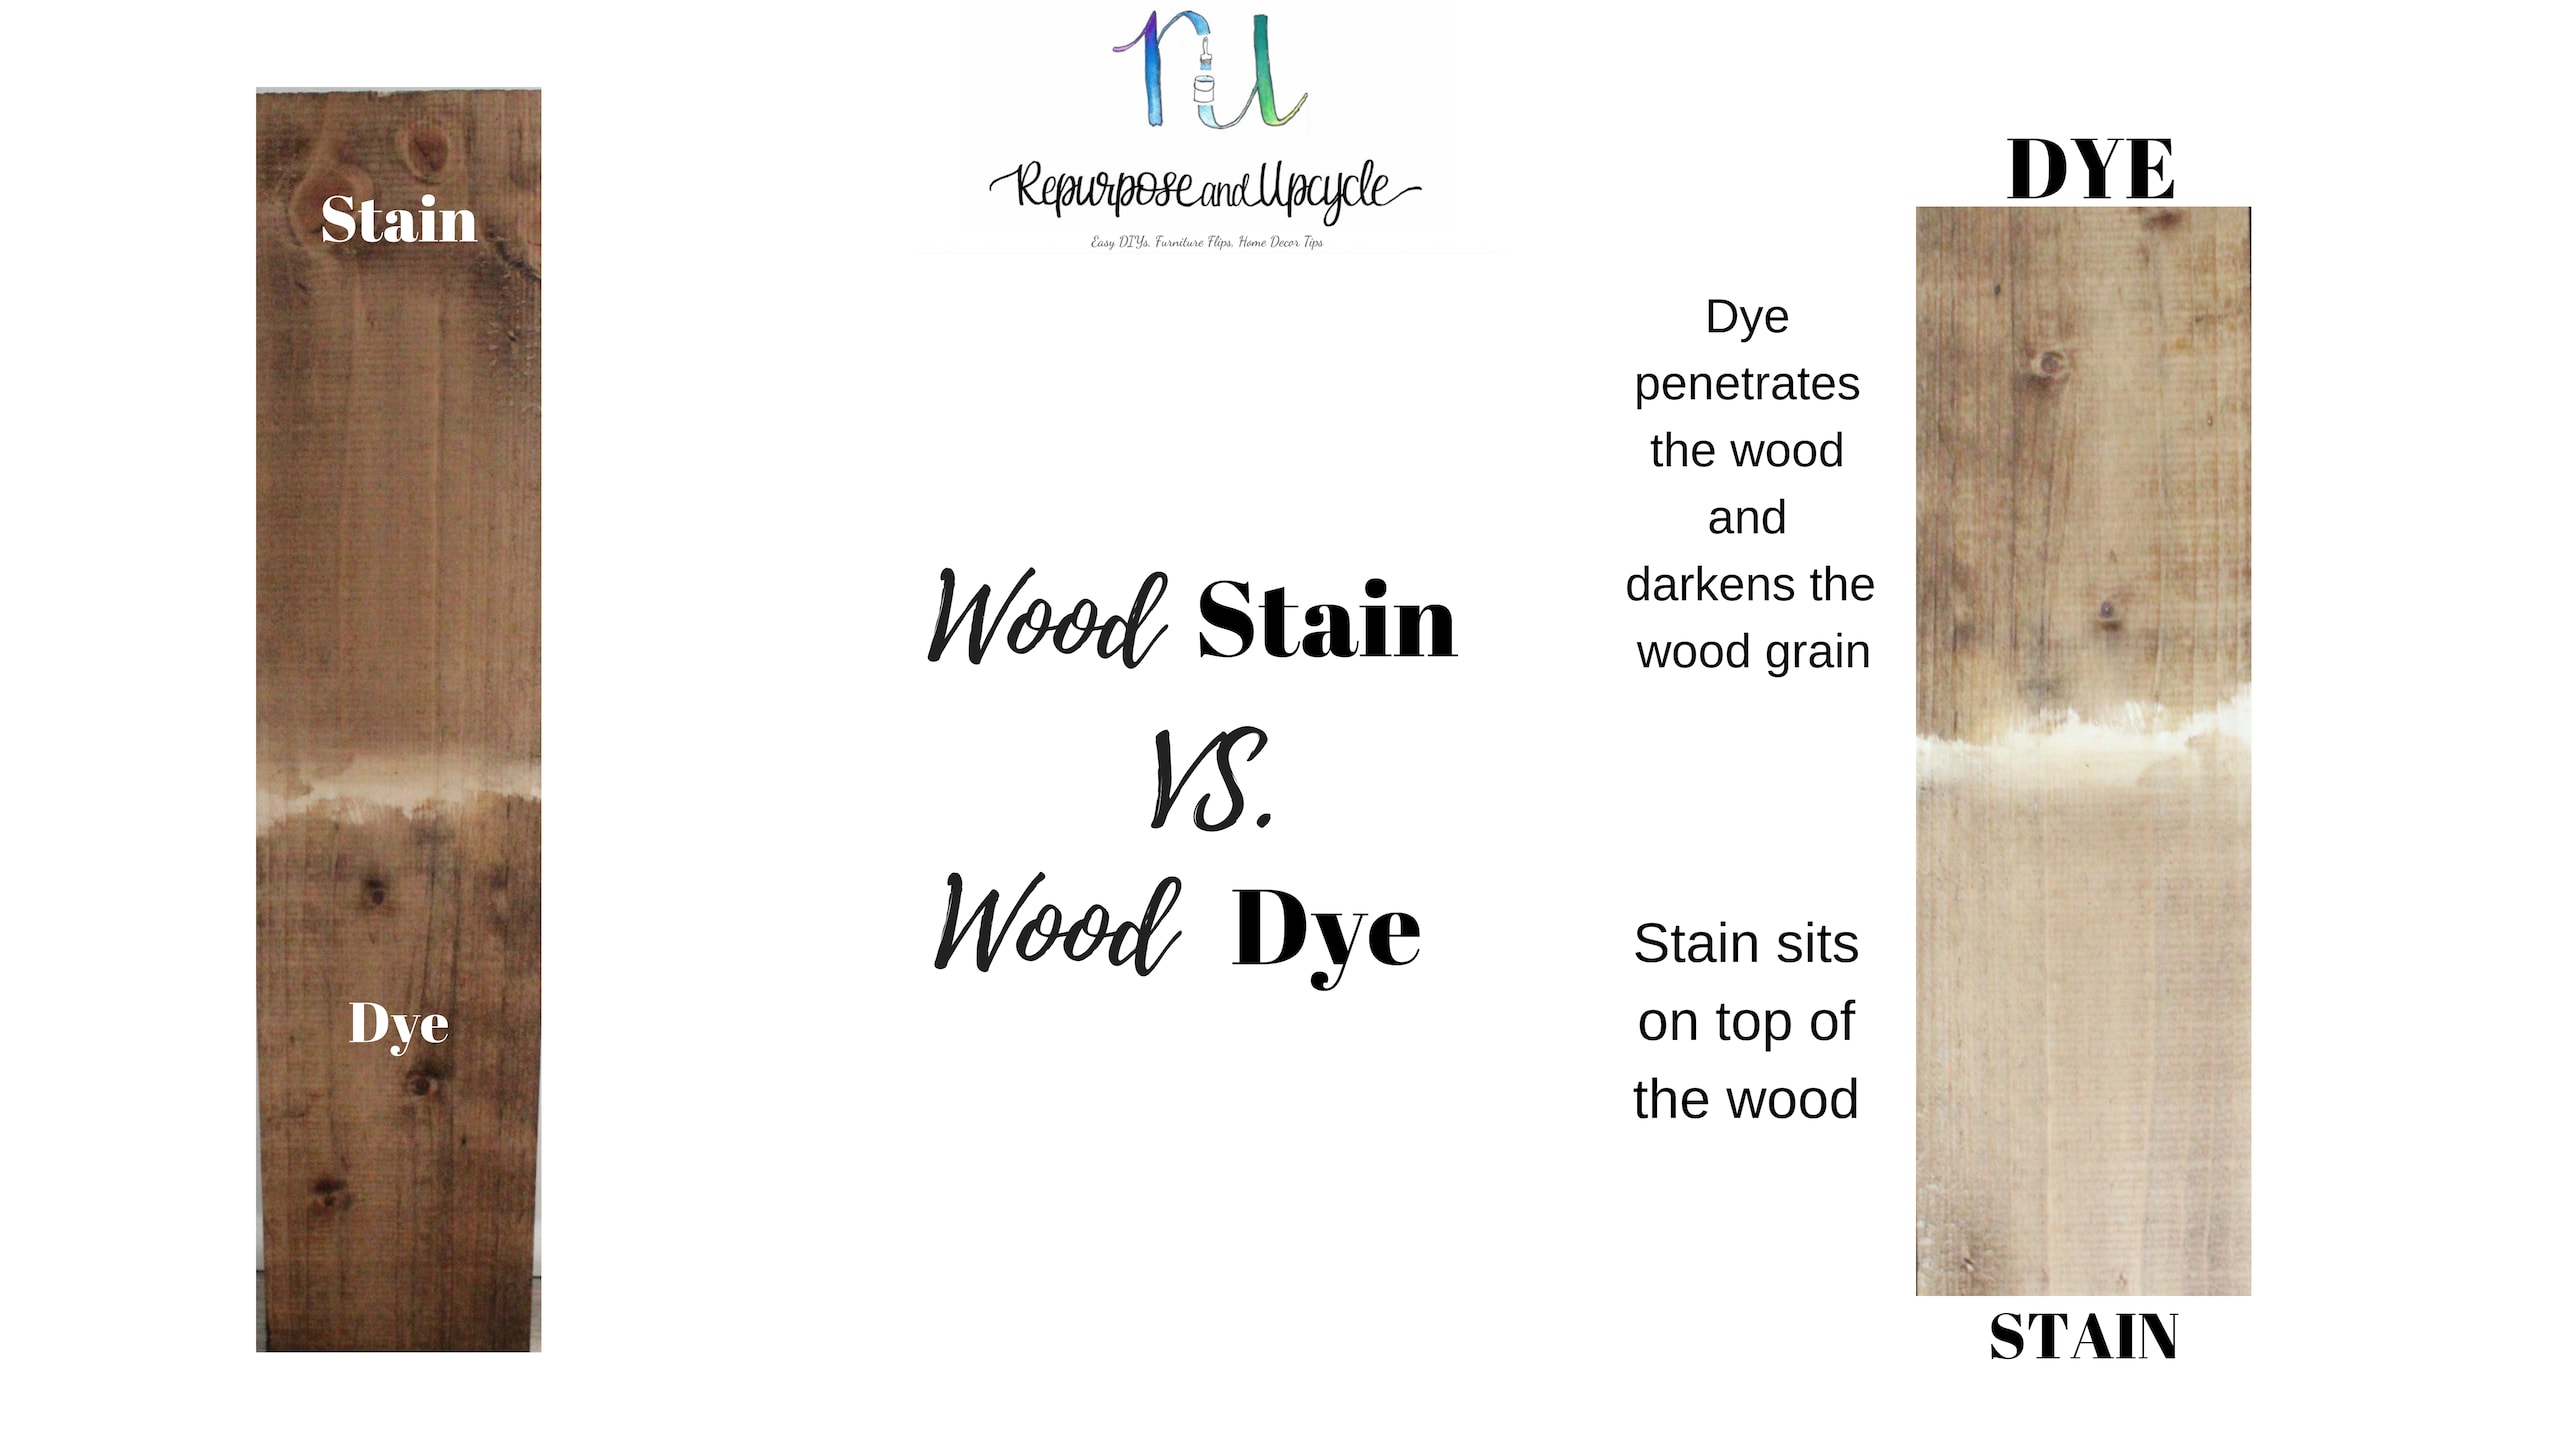 Varnish Vs. Stain: What's the Difference?